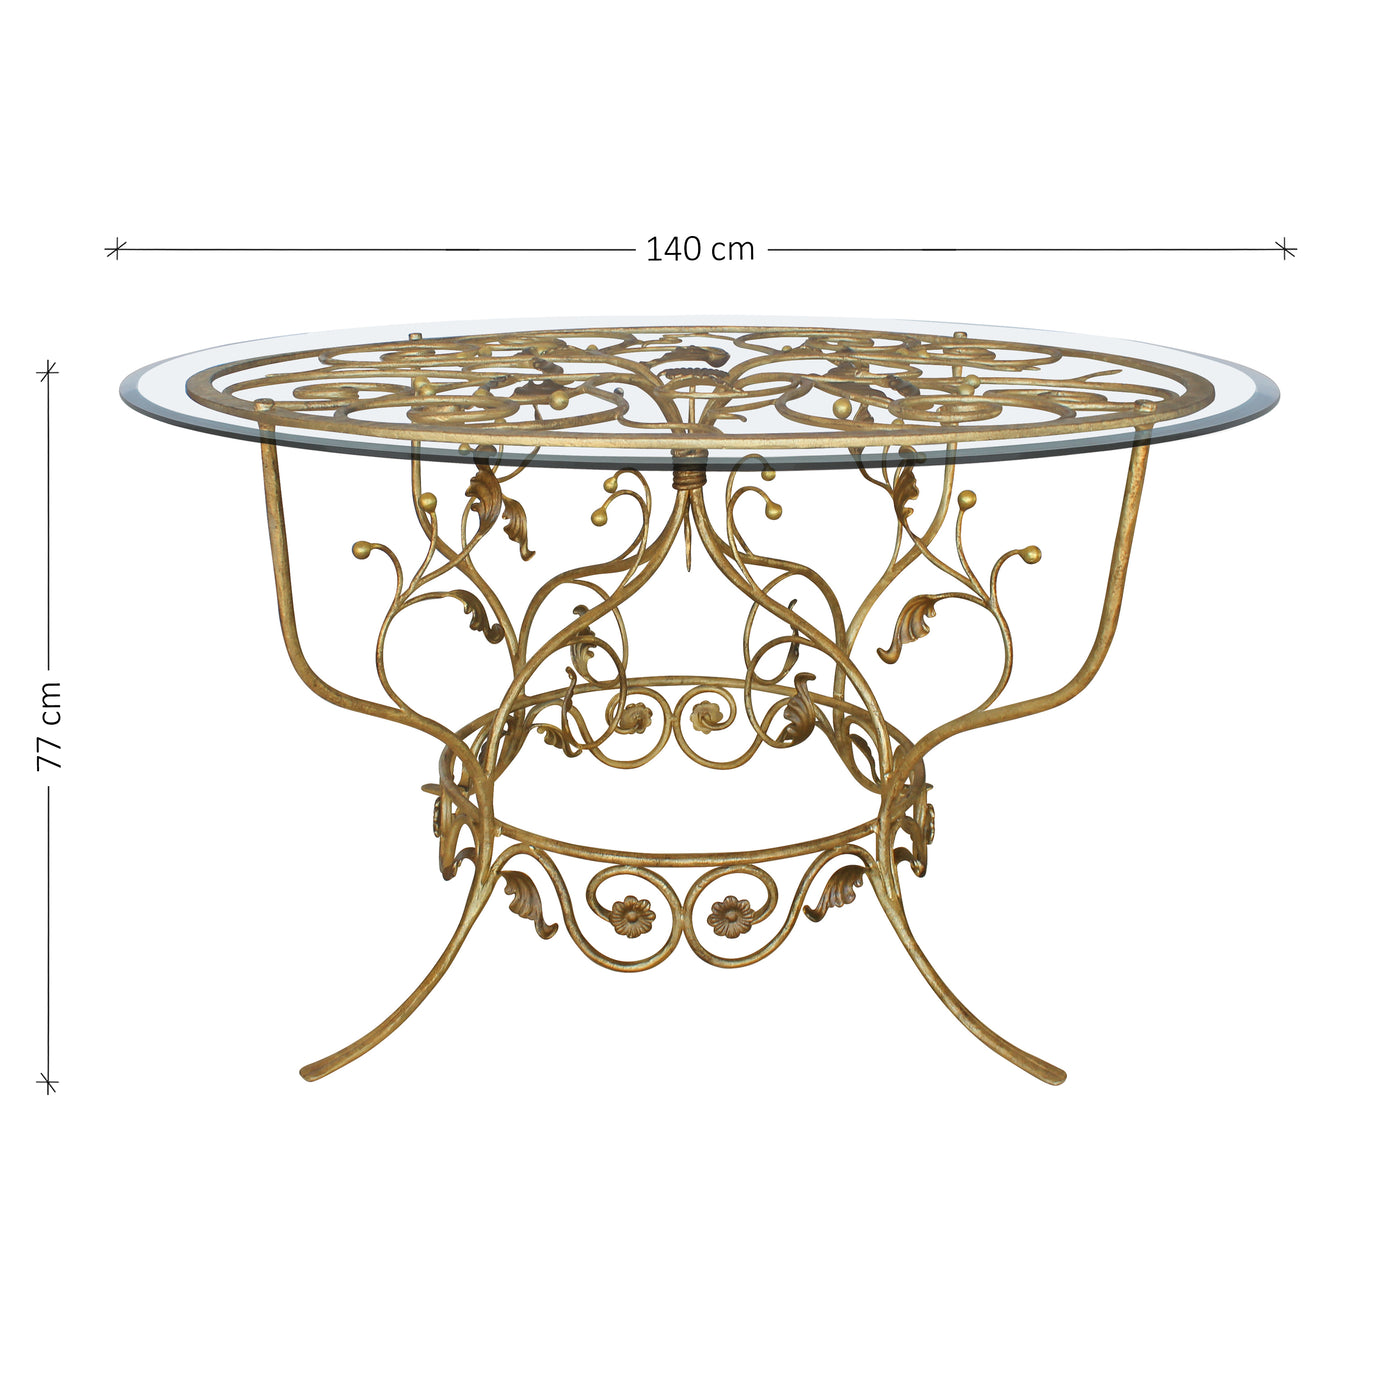 A luxurious round entryway table with a classical metal forged base, topped with a clear circular glass; with annotated dimensions